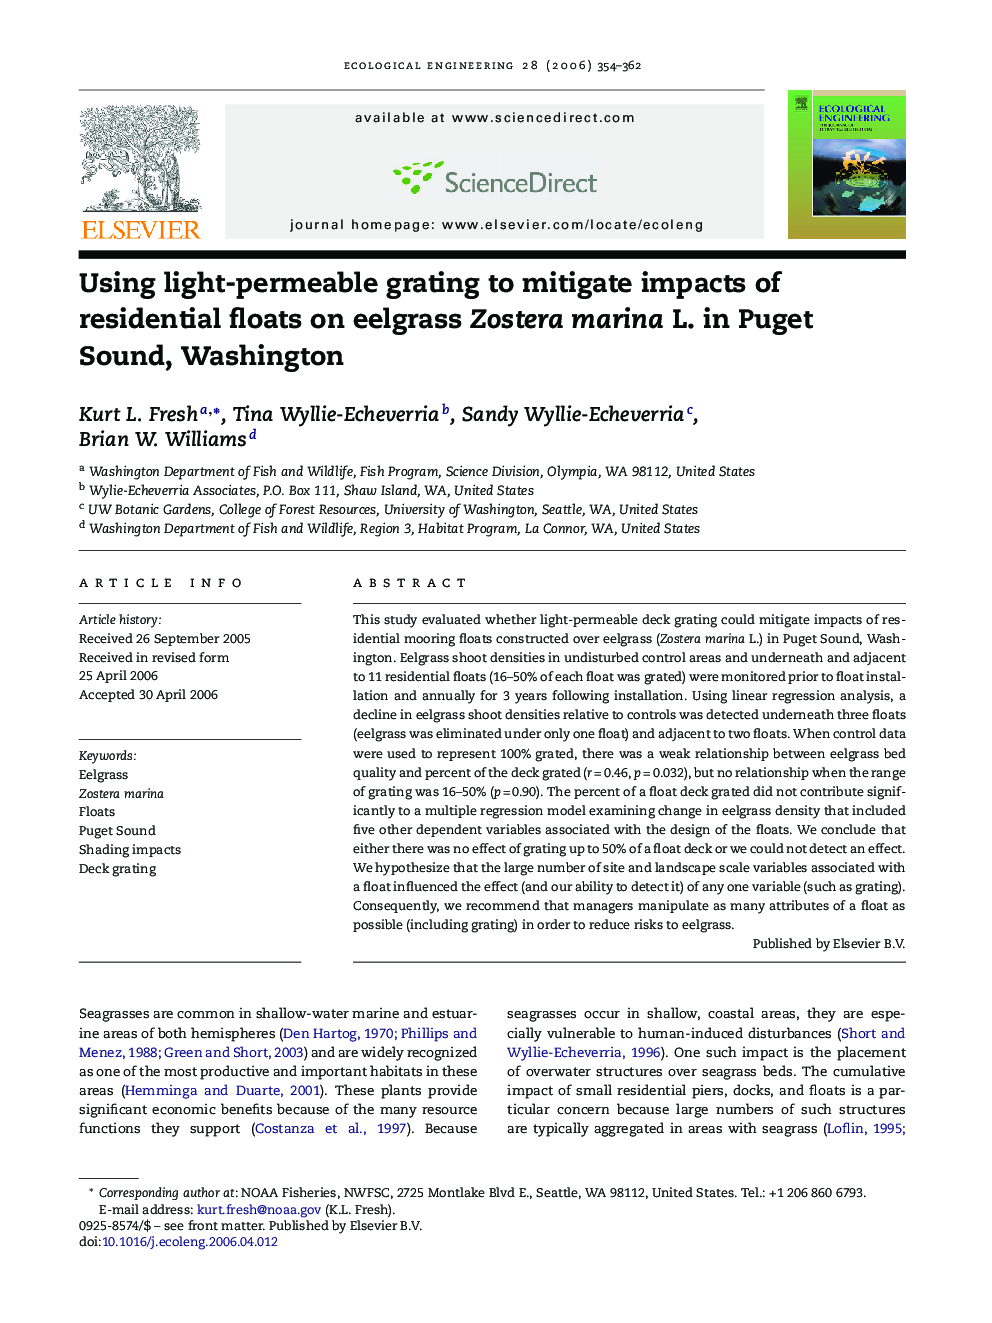 Using light-permeable grating to mitigate impacts of residential floats on eelgrass Zostera marina L. in Puget Sound, Washington